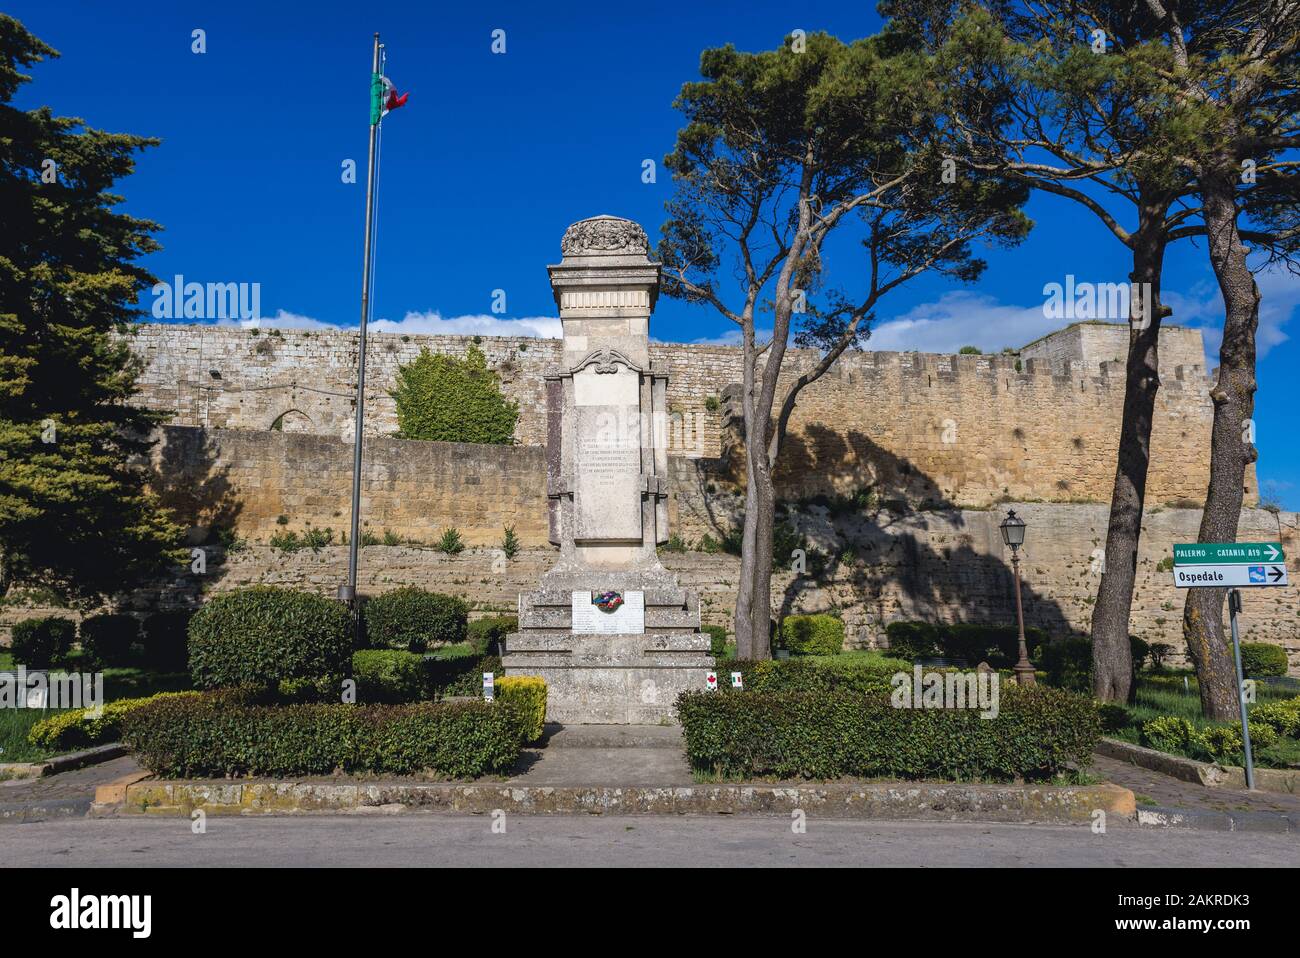 Monument to the fallen in both World Wars in front of Castello di Lombardia in Enna city and comune located at the center of Sicily in southern Italy Stock Photo